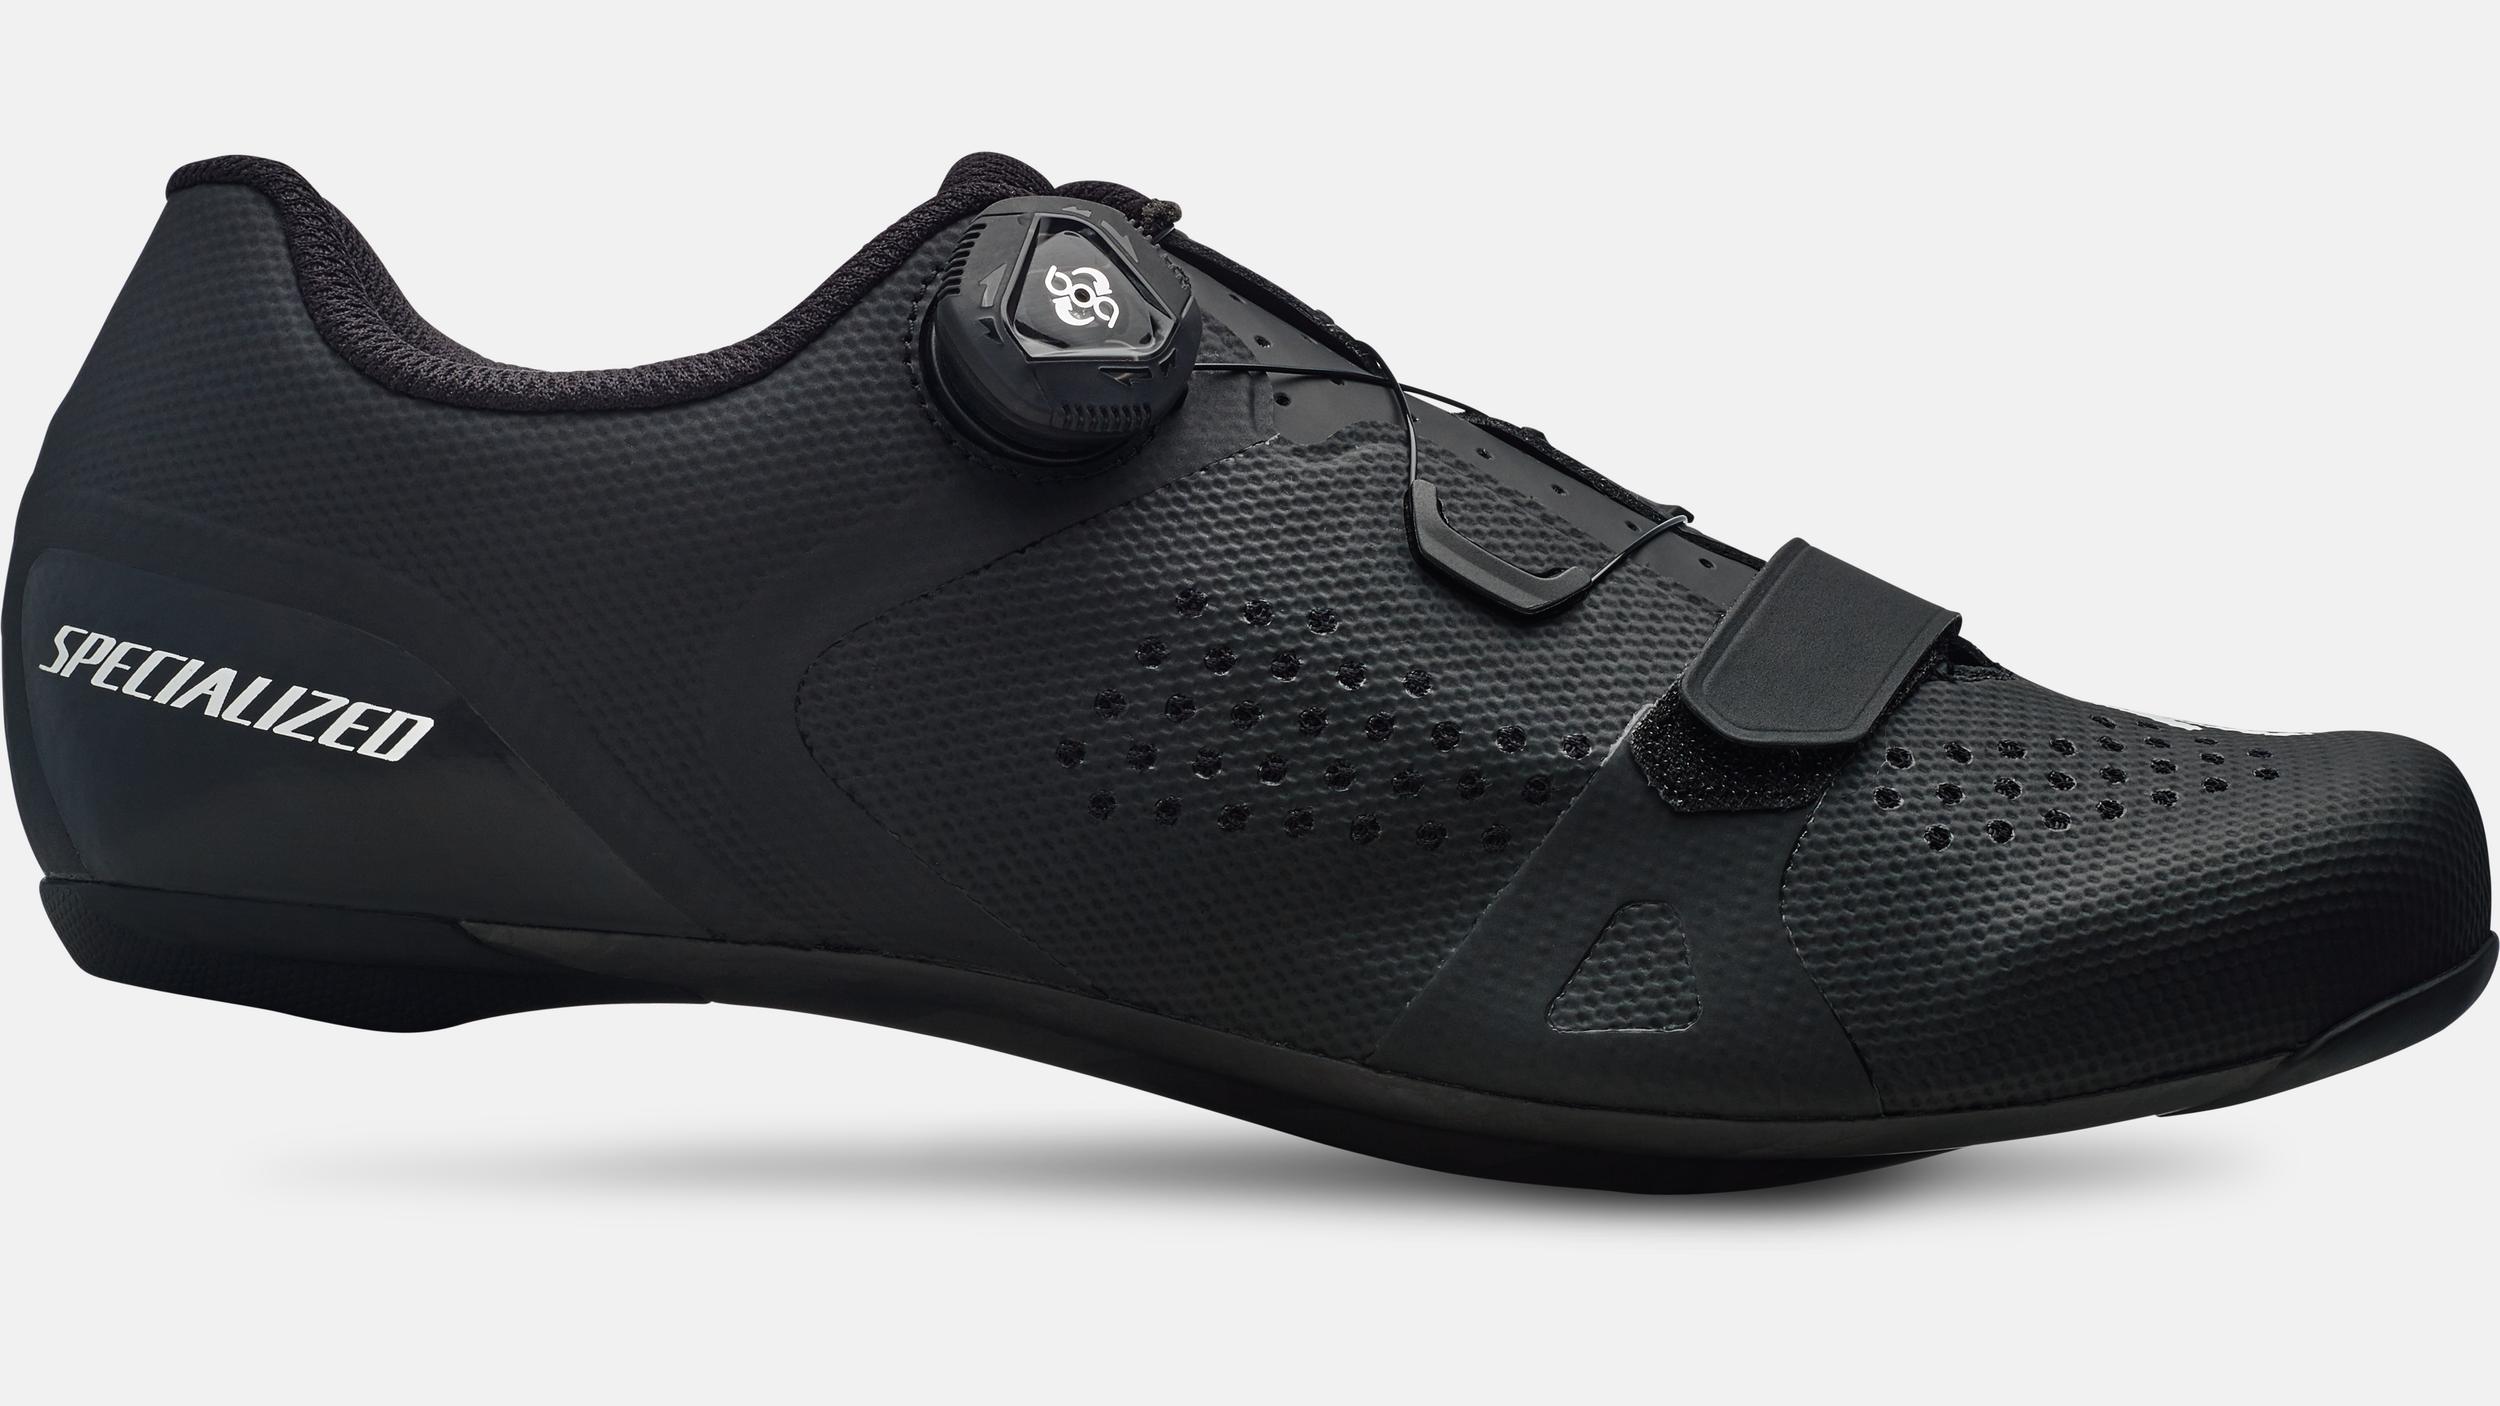 Torch 2.0 Road Shoes | Specialized.com